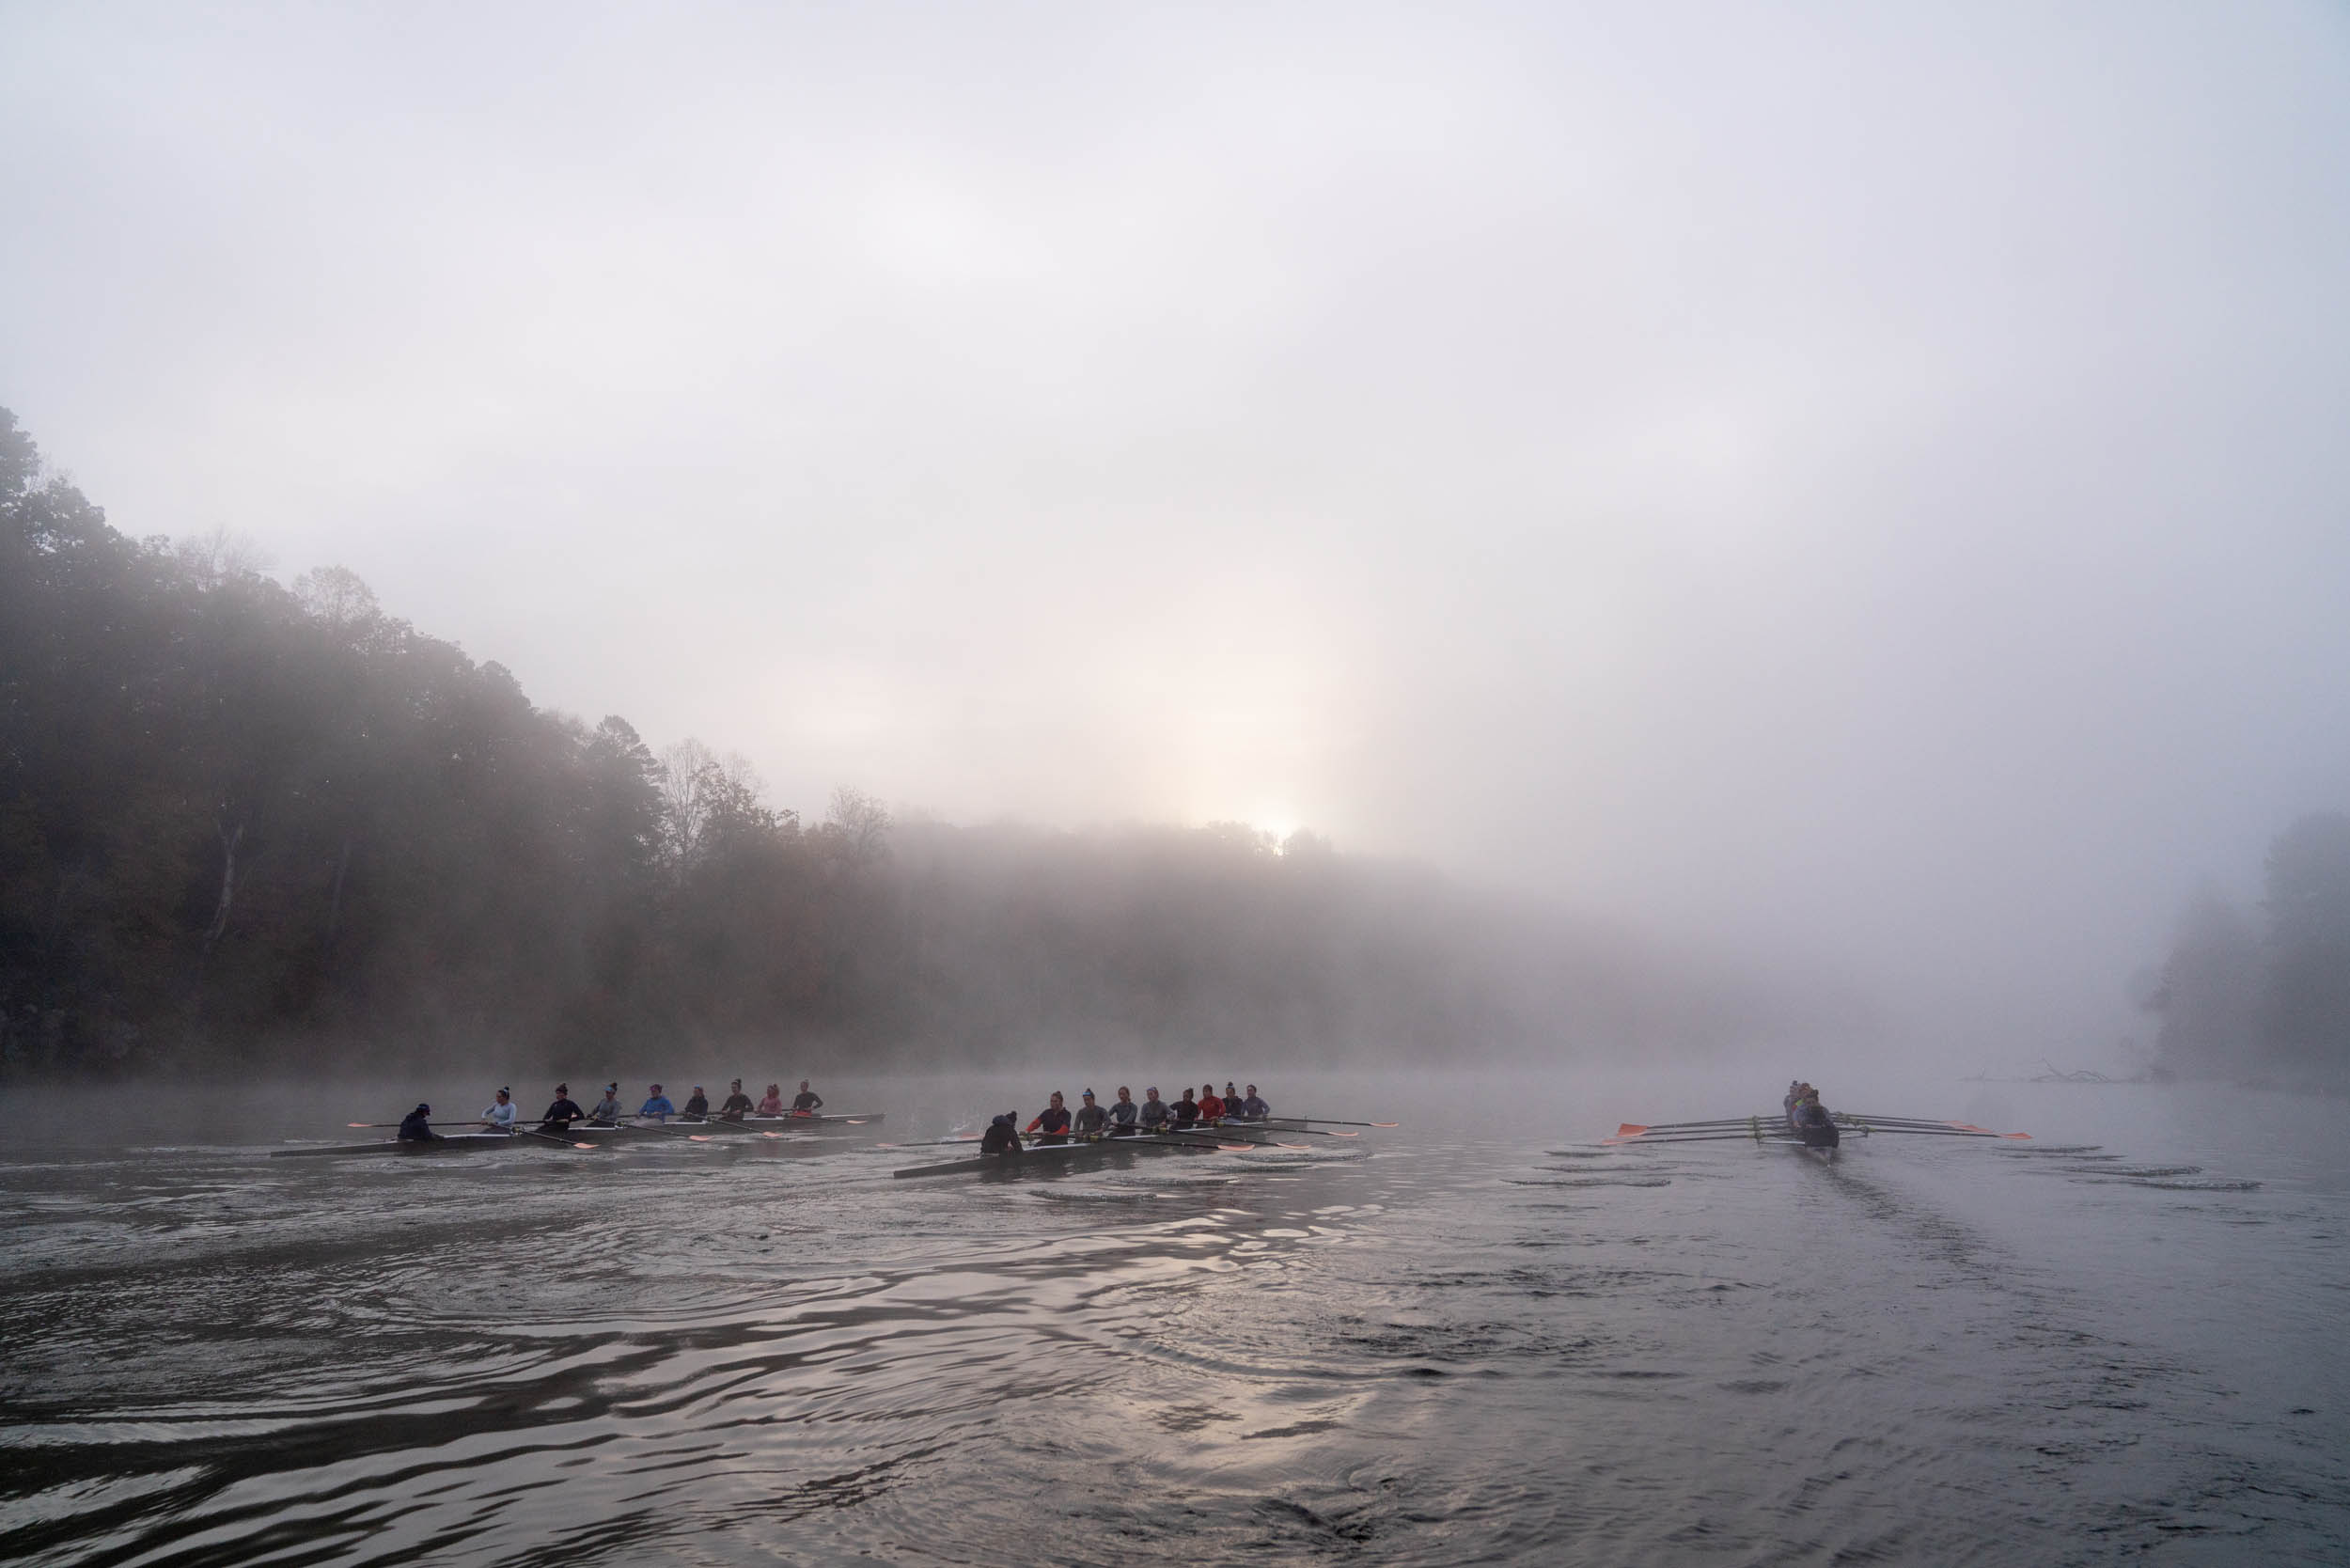 Rowing team on a foggy river